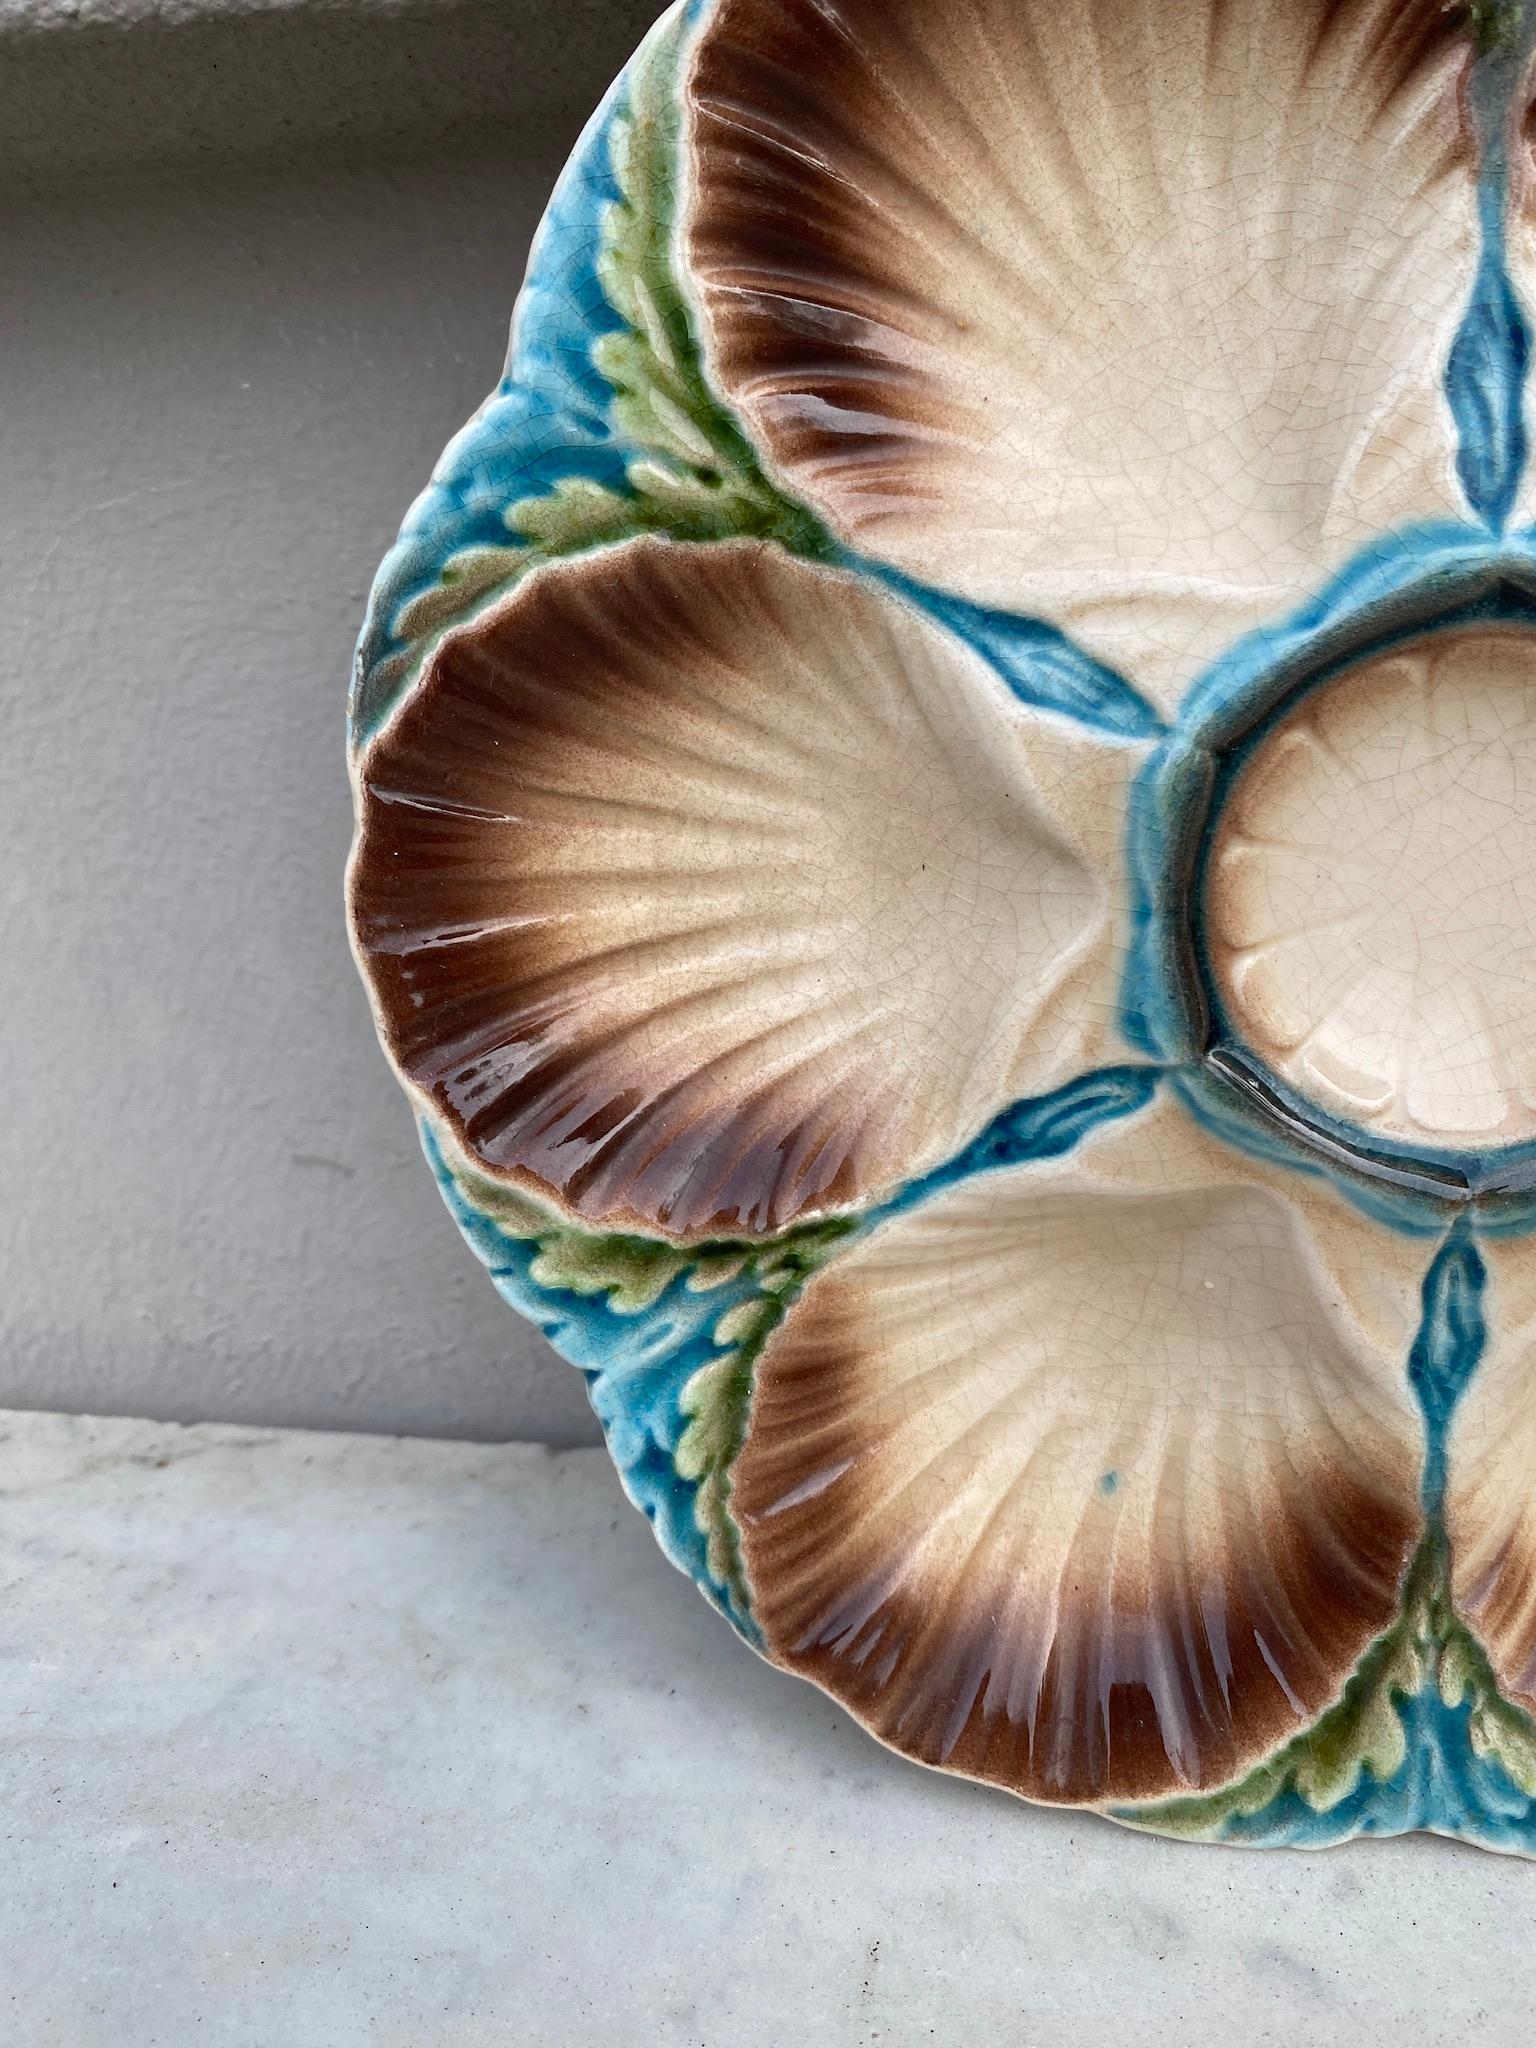 Majolica oyster plate Sarreguemines, circa 1890.
6 Shells and space for the lemon on the center.